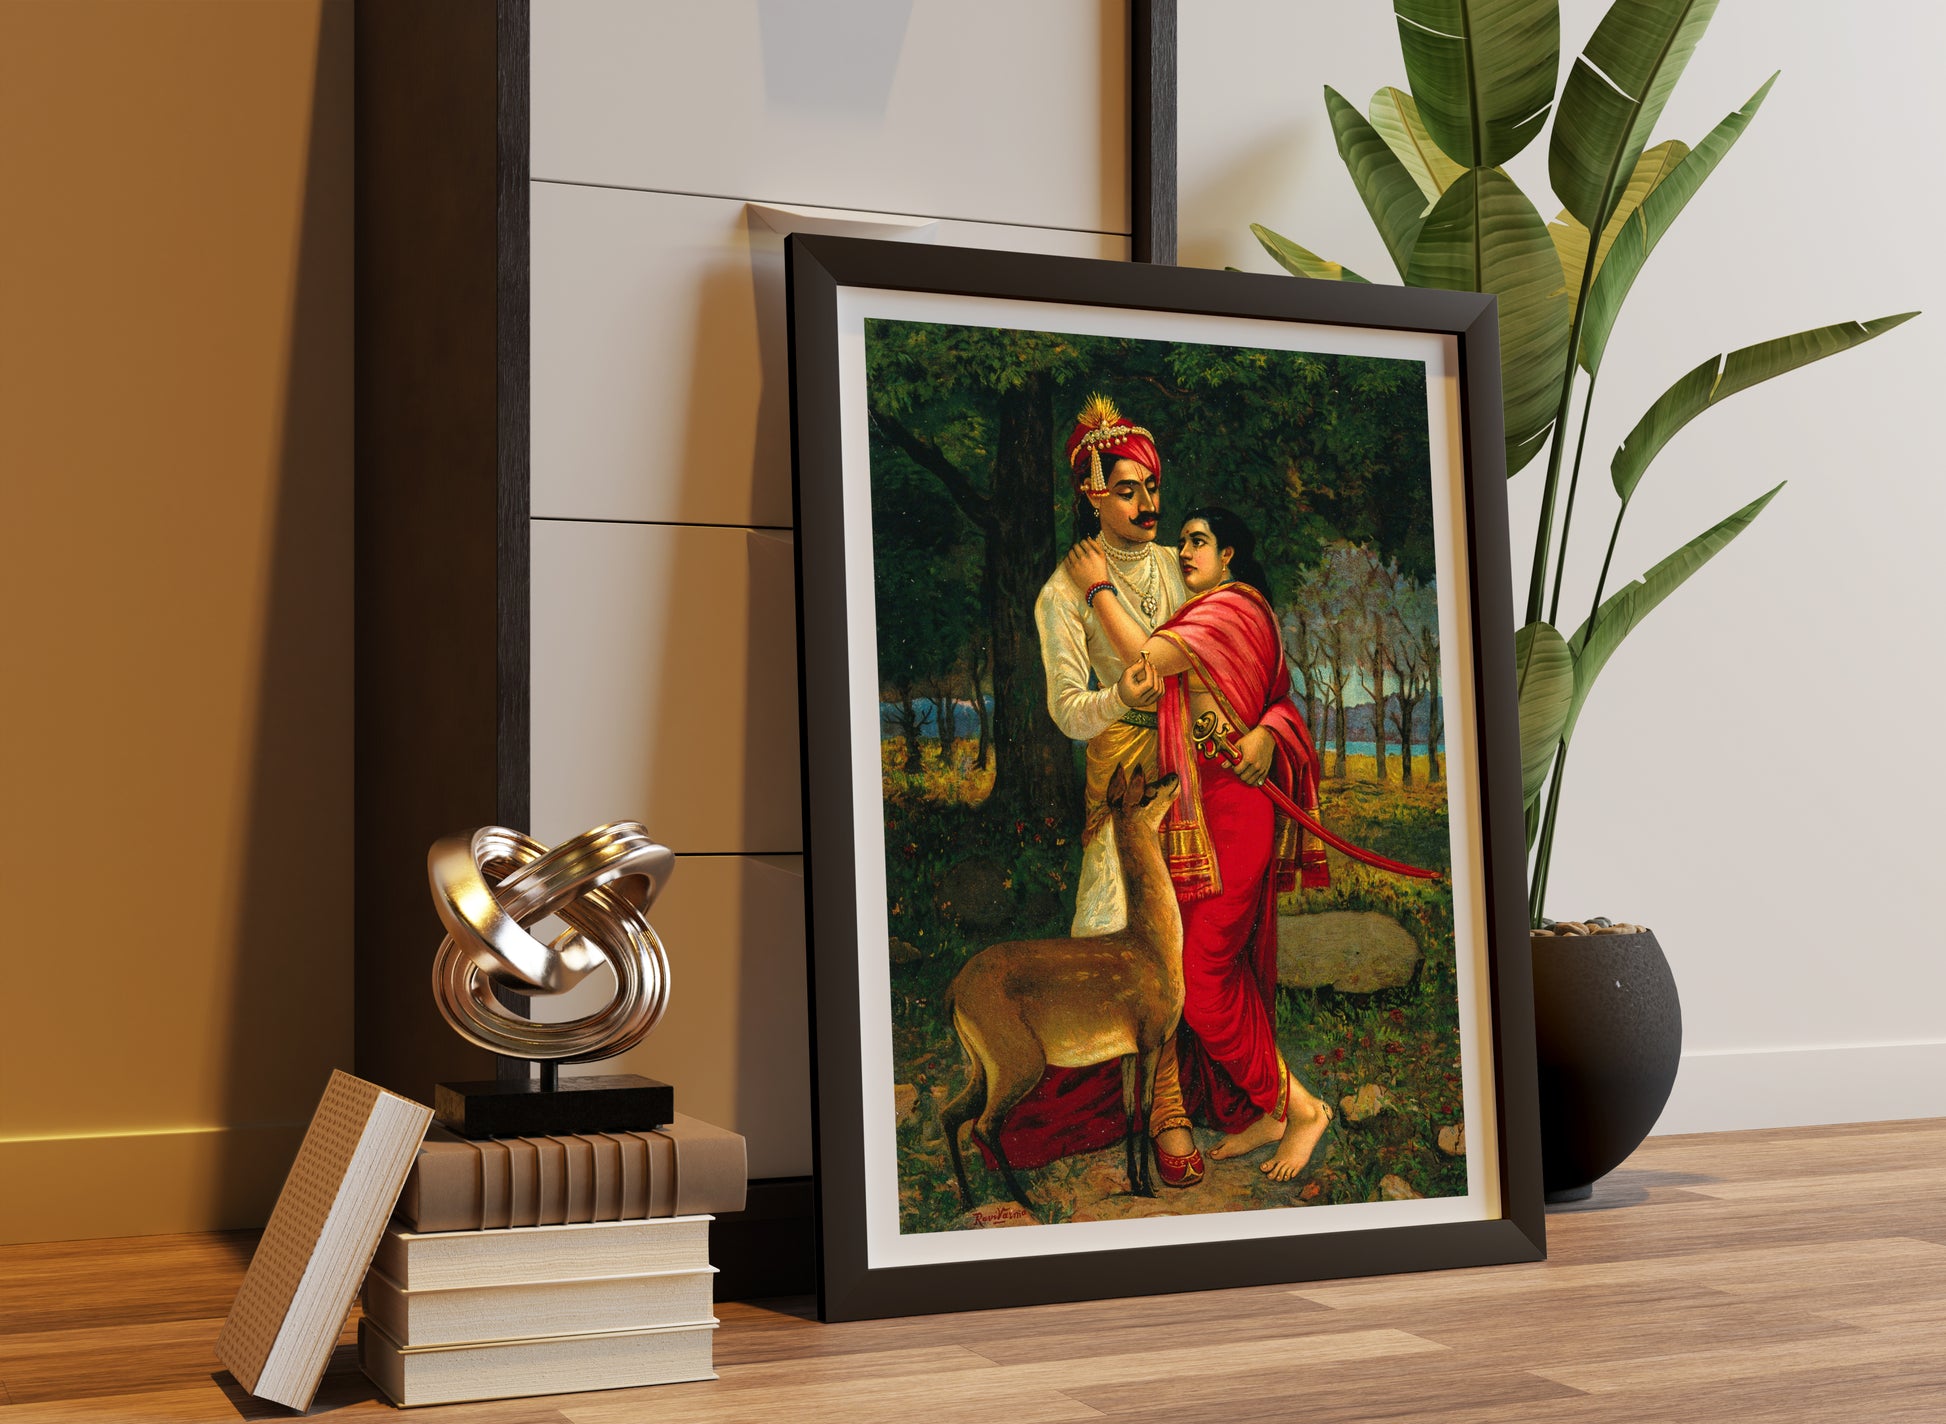 King Dushyanta proposing marriage with a ring to Shakuntala by Raja Ravi Varma Wall Art Painting for Home Decor 